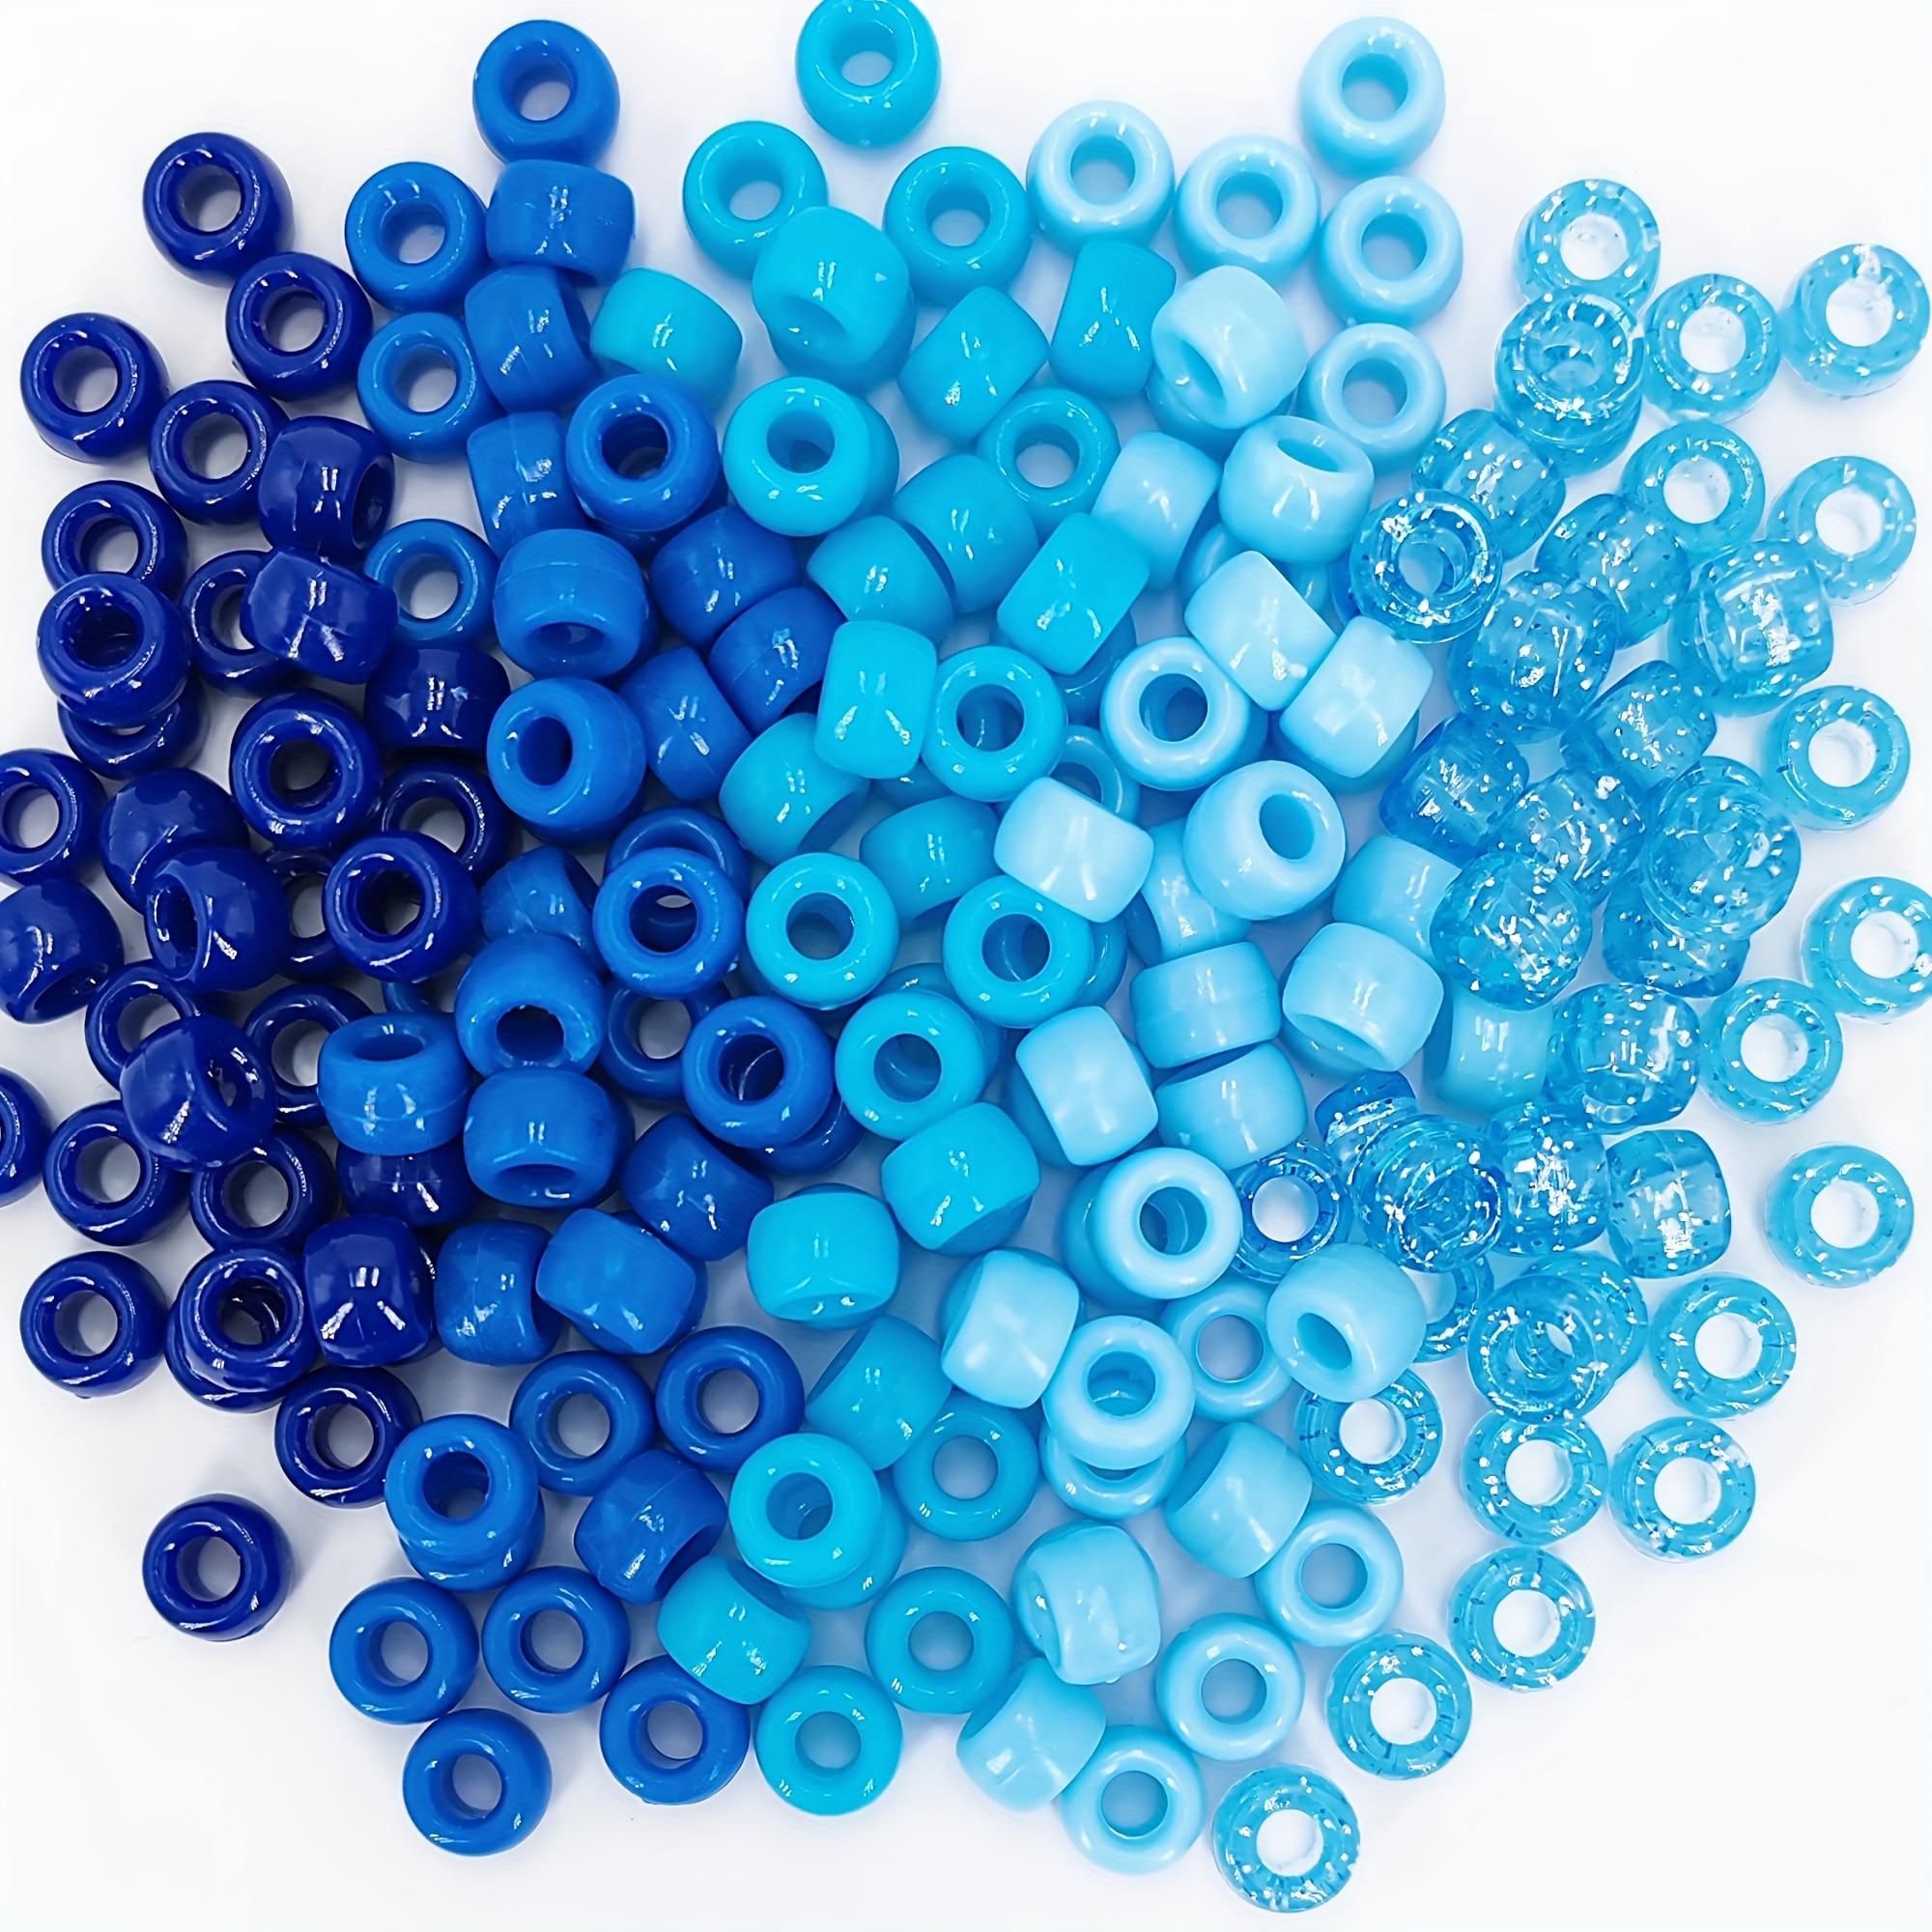 

1000pcs 6x9mm 5 Styles Blue Pony Large Hole Beads For Jewelry Making Diy Hair Braids, Fashion Bracelet Necklace Handicrafts Small Business Supplies